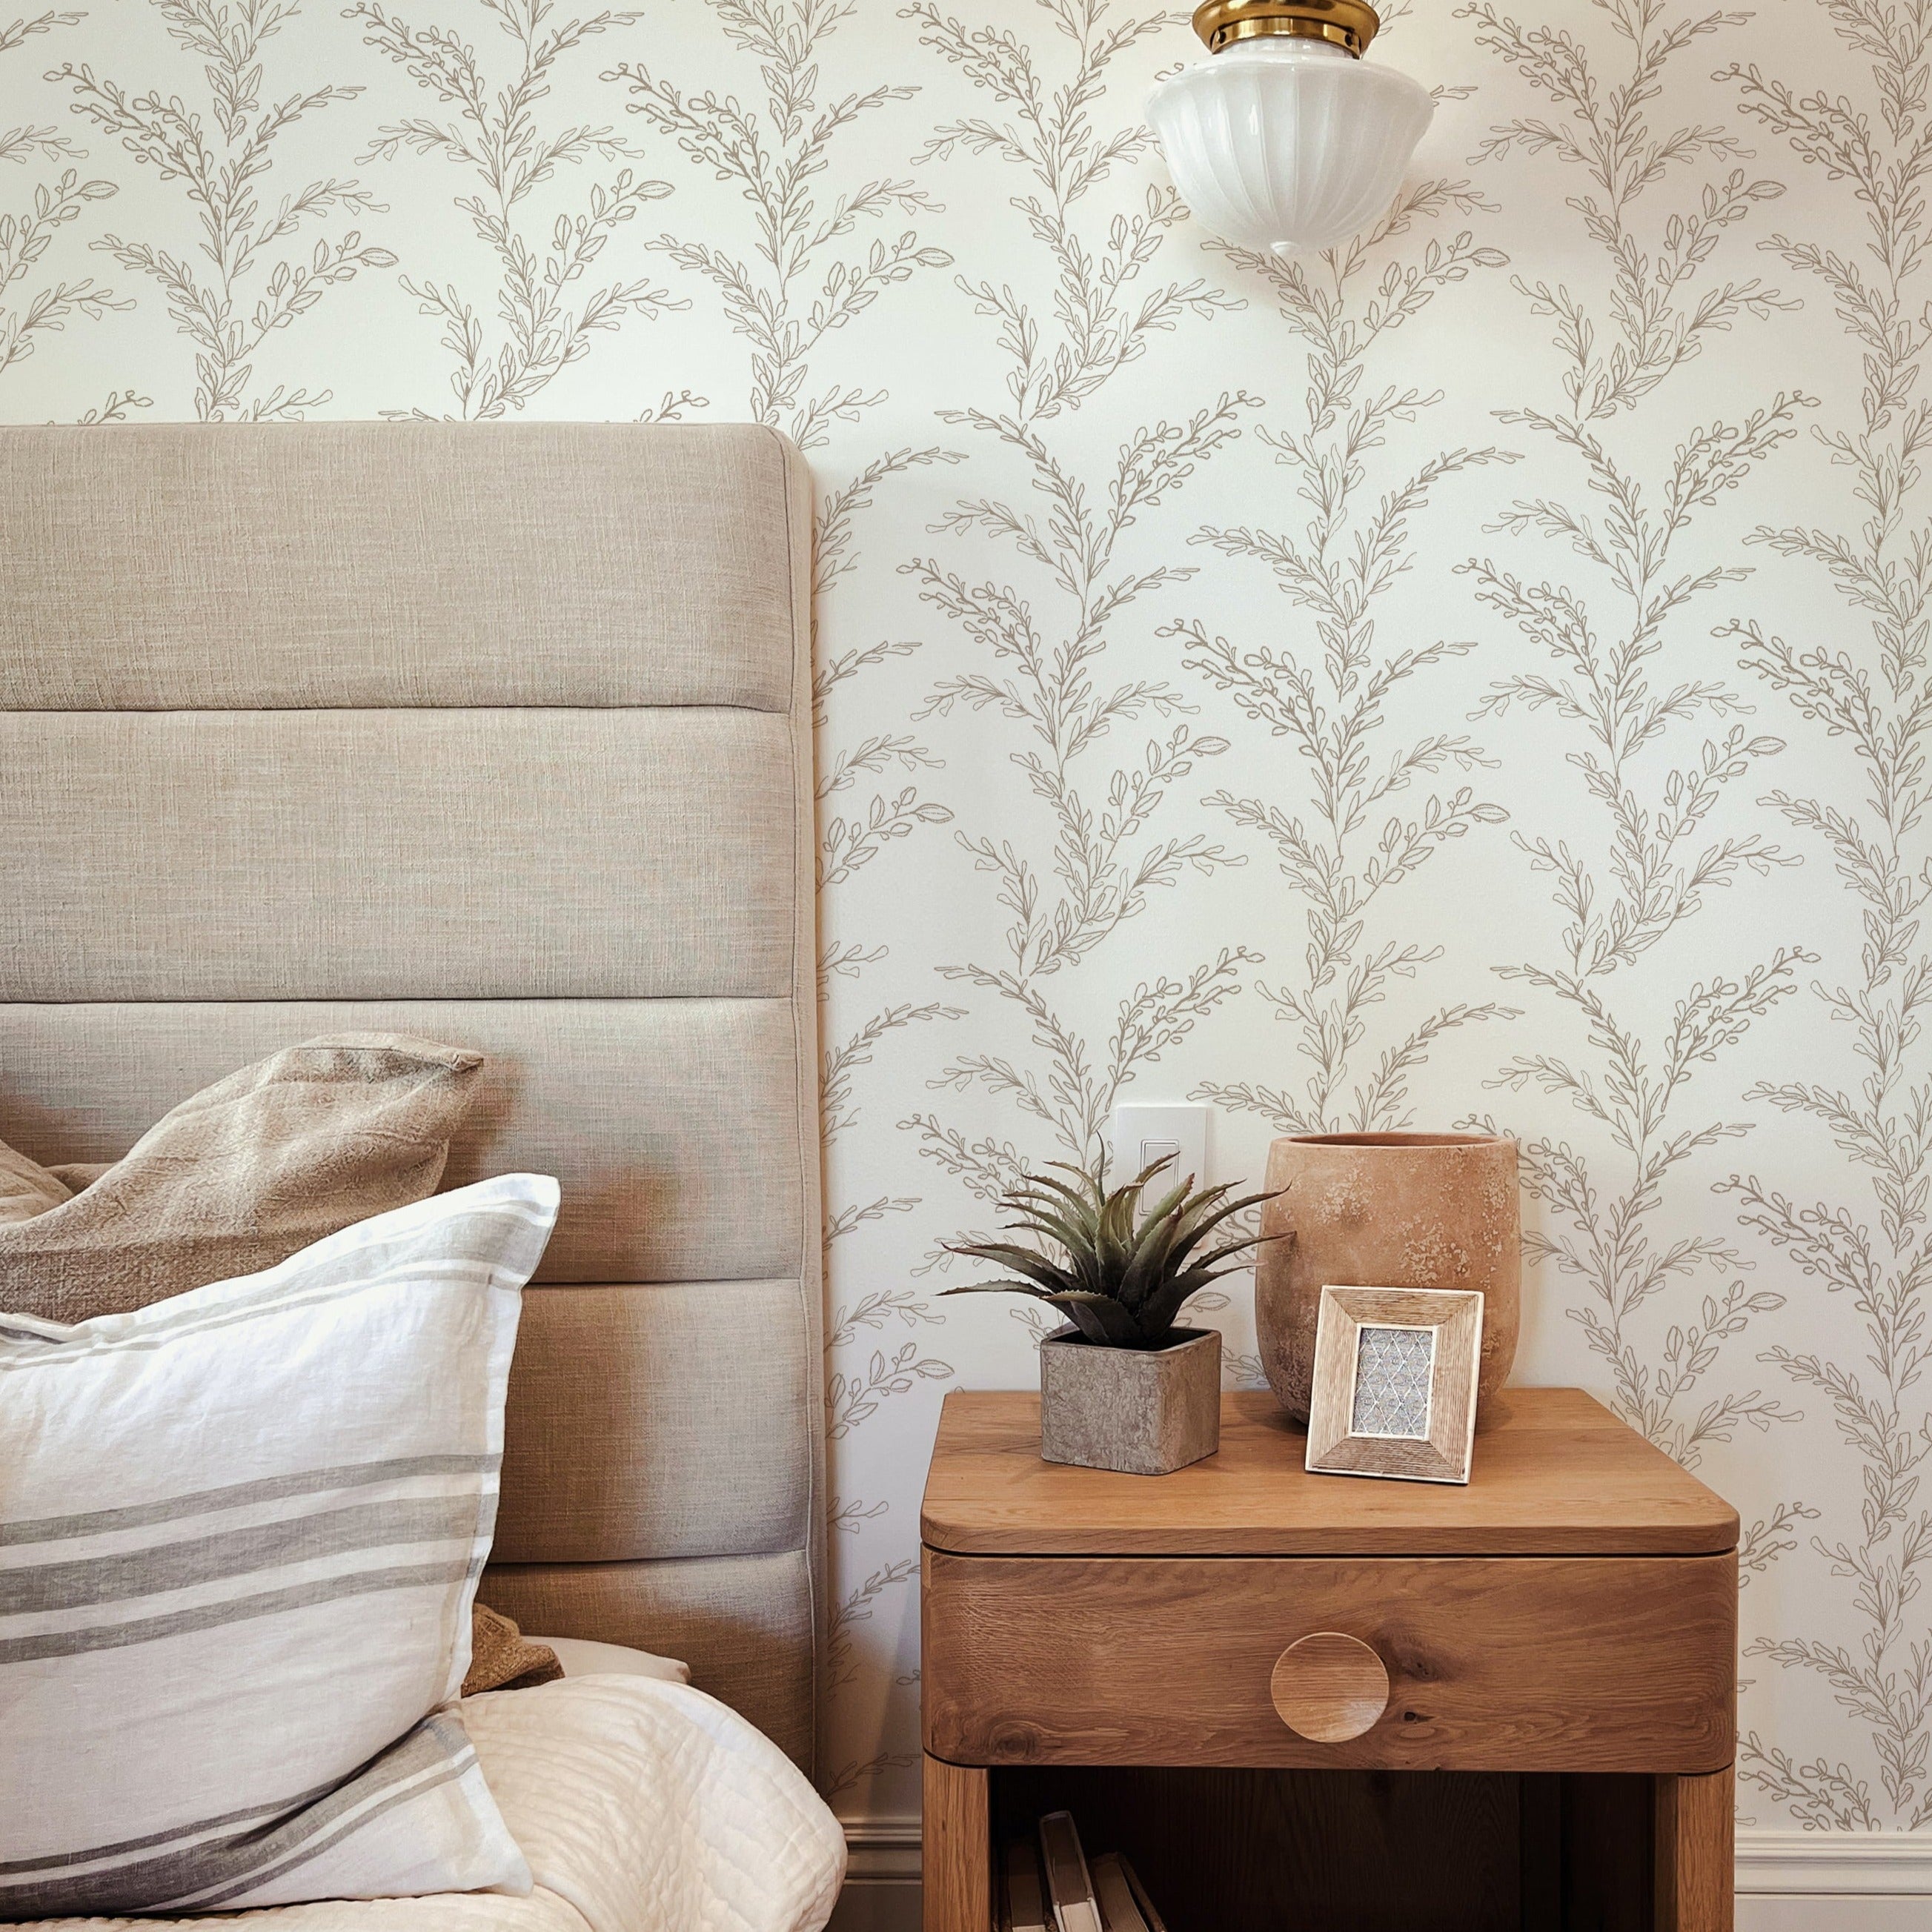 An elegant bedroom showcasing the Rustic Foliage Wallpaper in Beige, providing a serene backdrop to a fabric headboard and a wooden bedside table with a potted plant, a beige textured vase, and a small photo frame